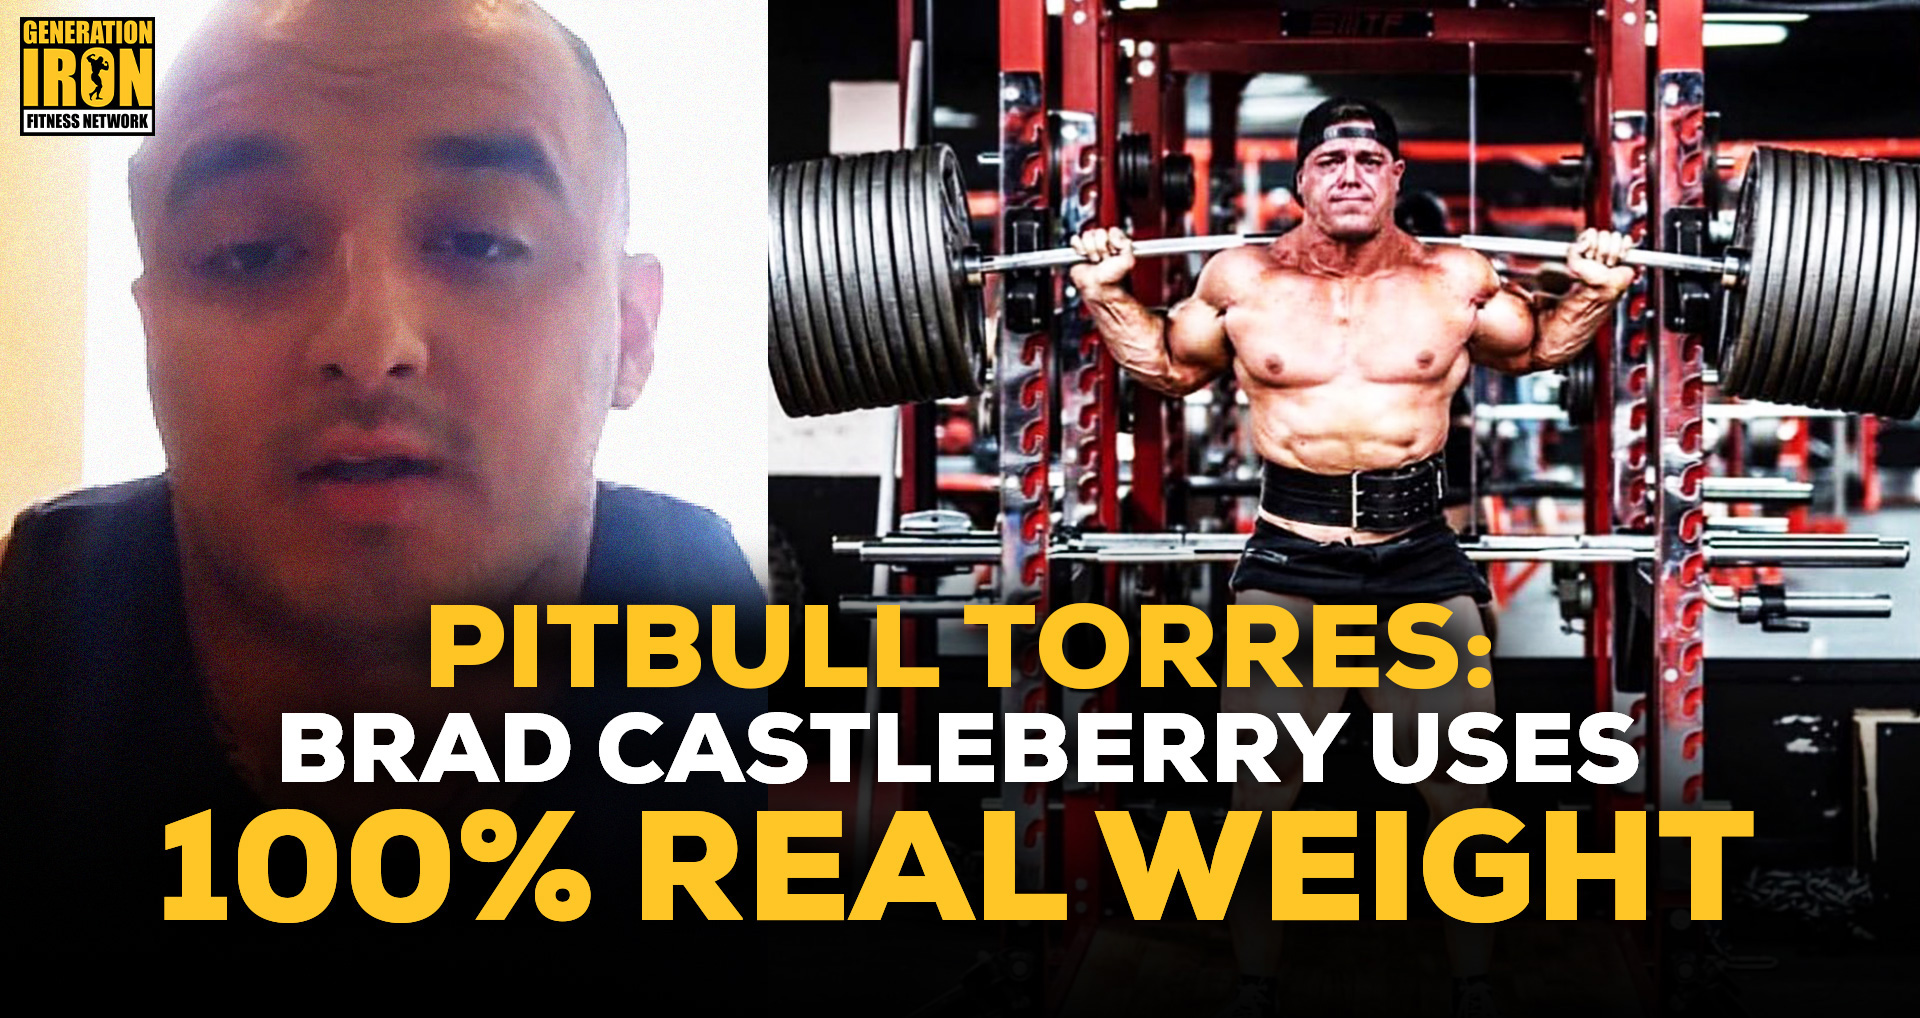 how much does pitbull torres weight? 2